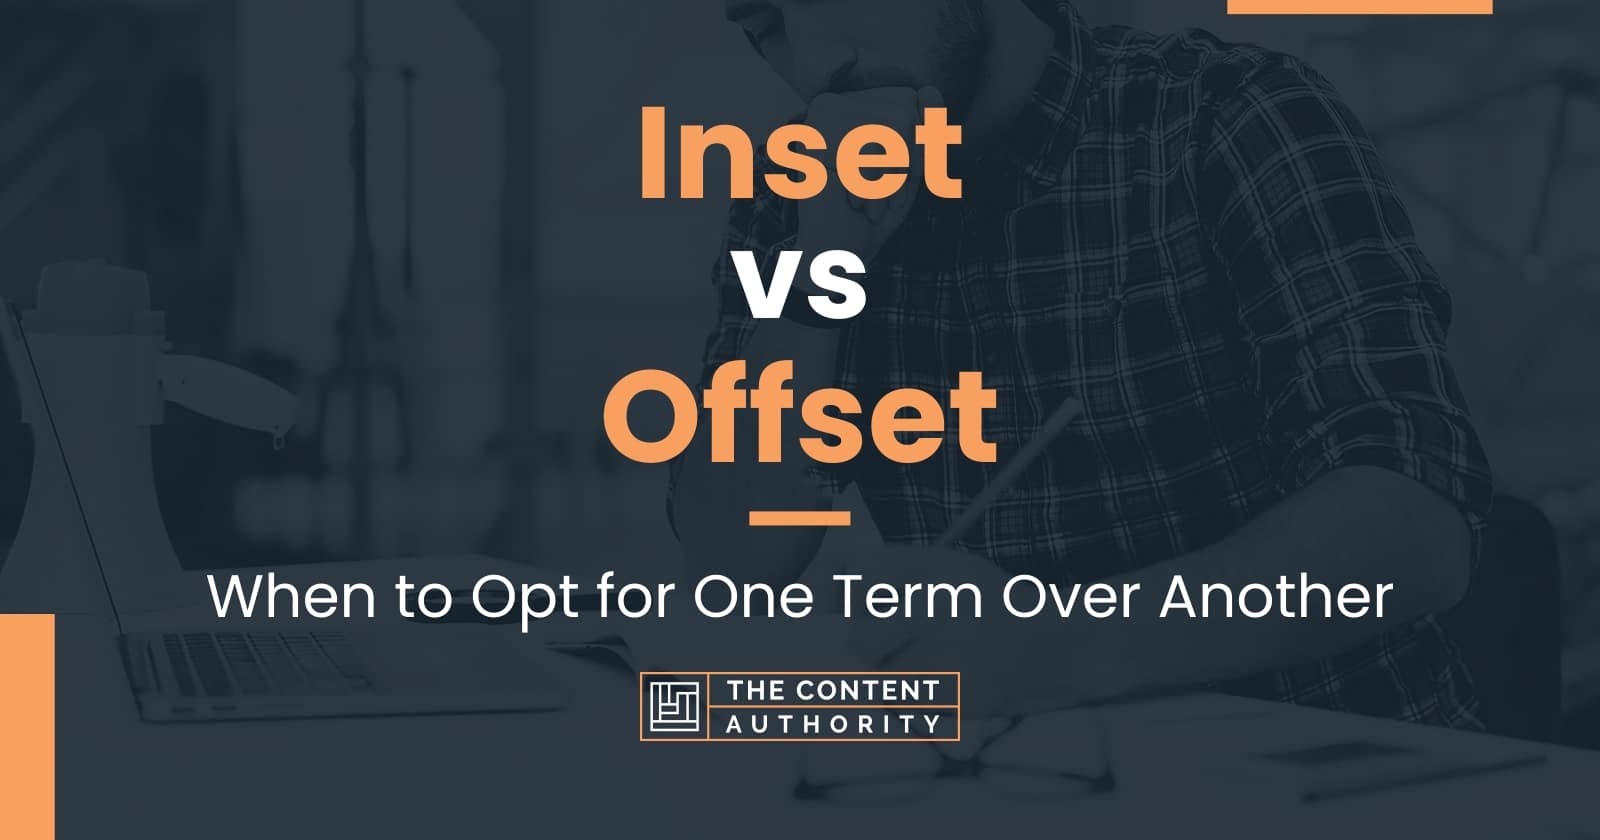 Inset vs Offset: When to Opt for One Term Over Another